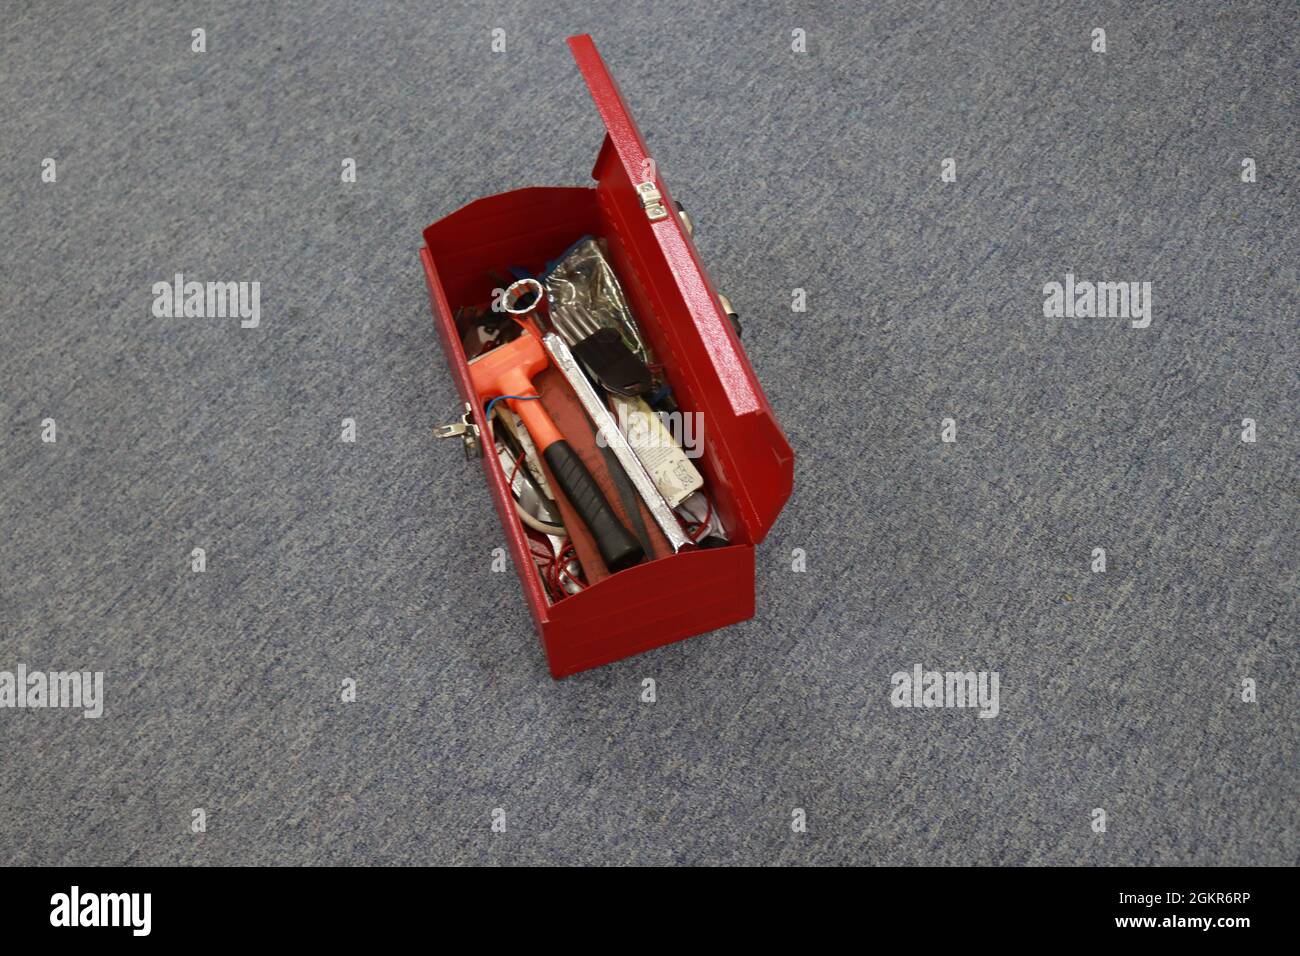 A red tool box that contains a lot of tools, this box makes it easier for workers to store their tools and carry them when needed, and can reduce work Stock Photo